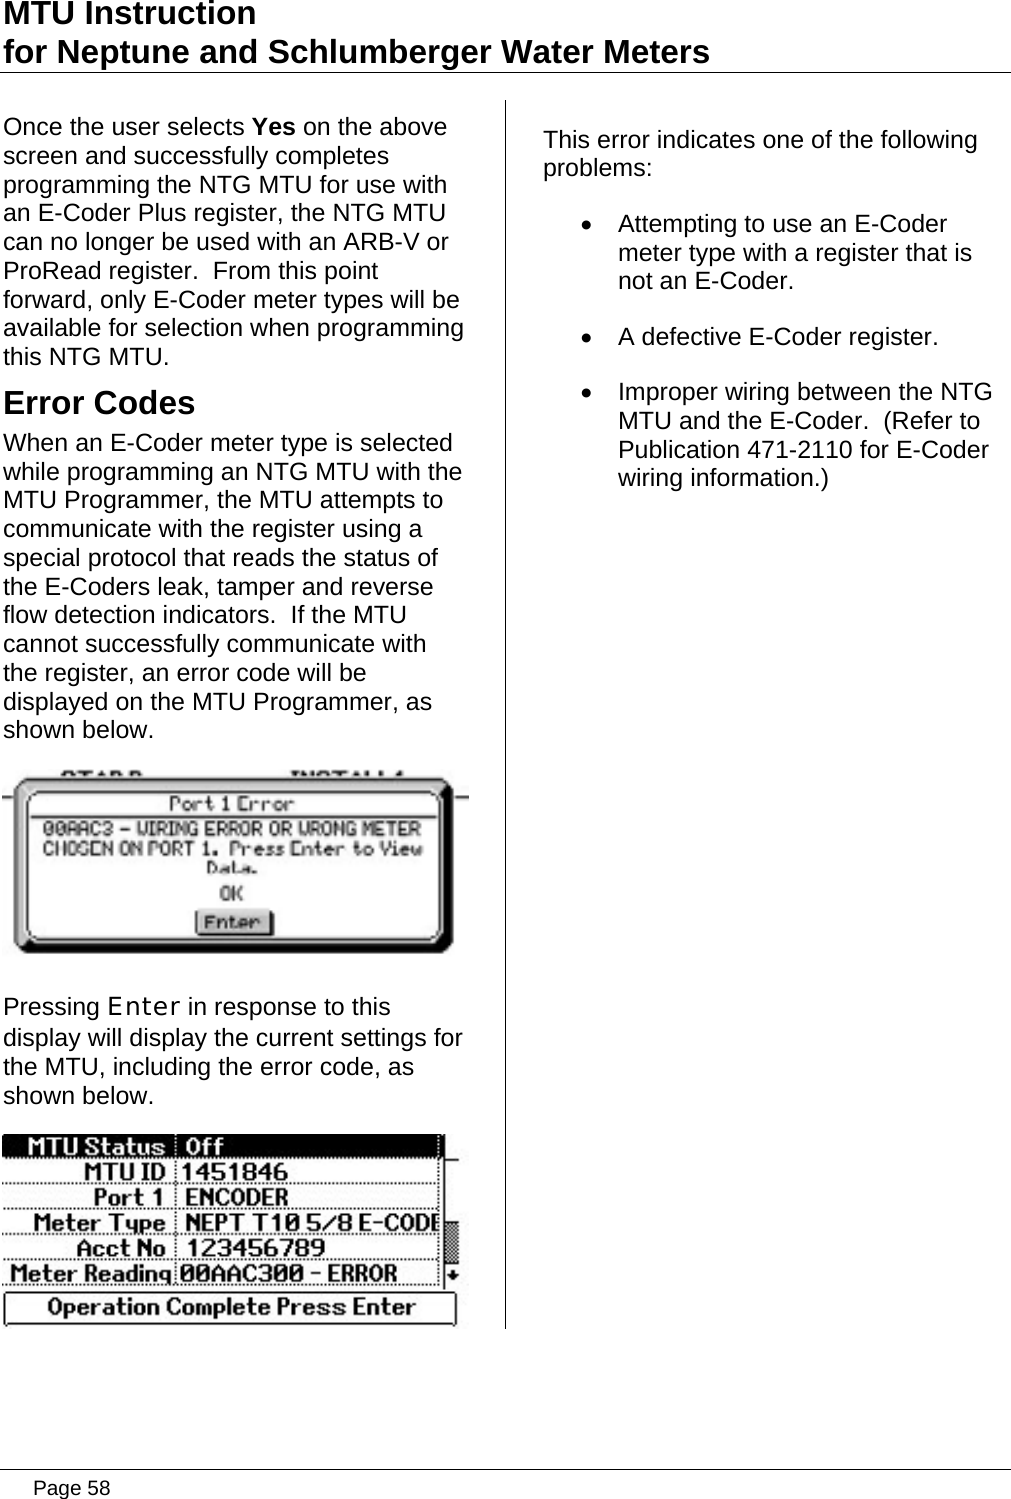 Page 58 of Aclara Technologies 09015 Transmitter for Meter Reading User Manual users manual